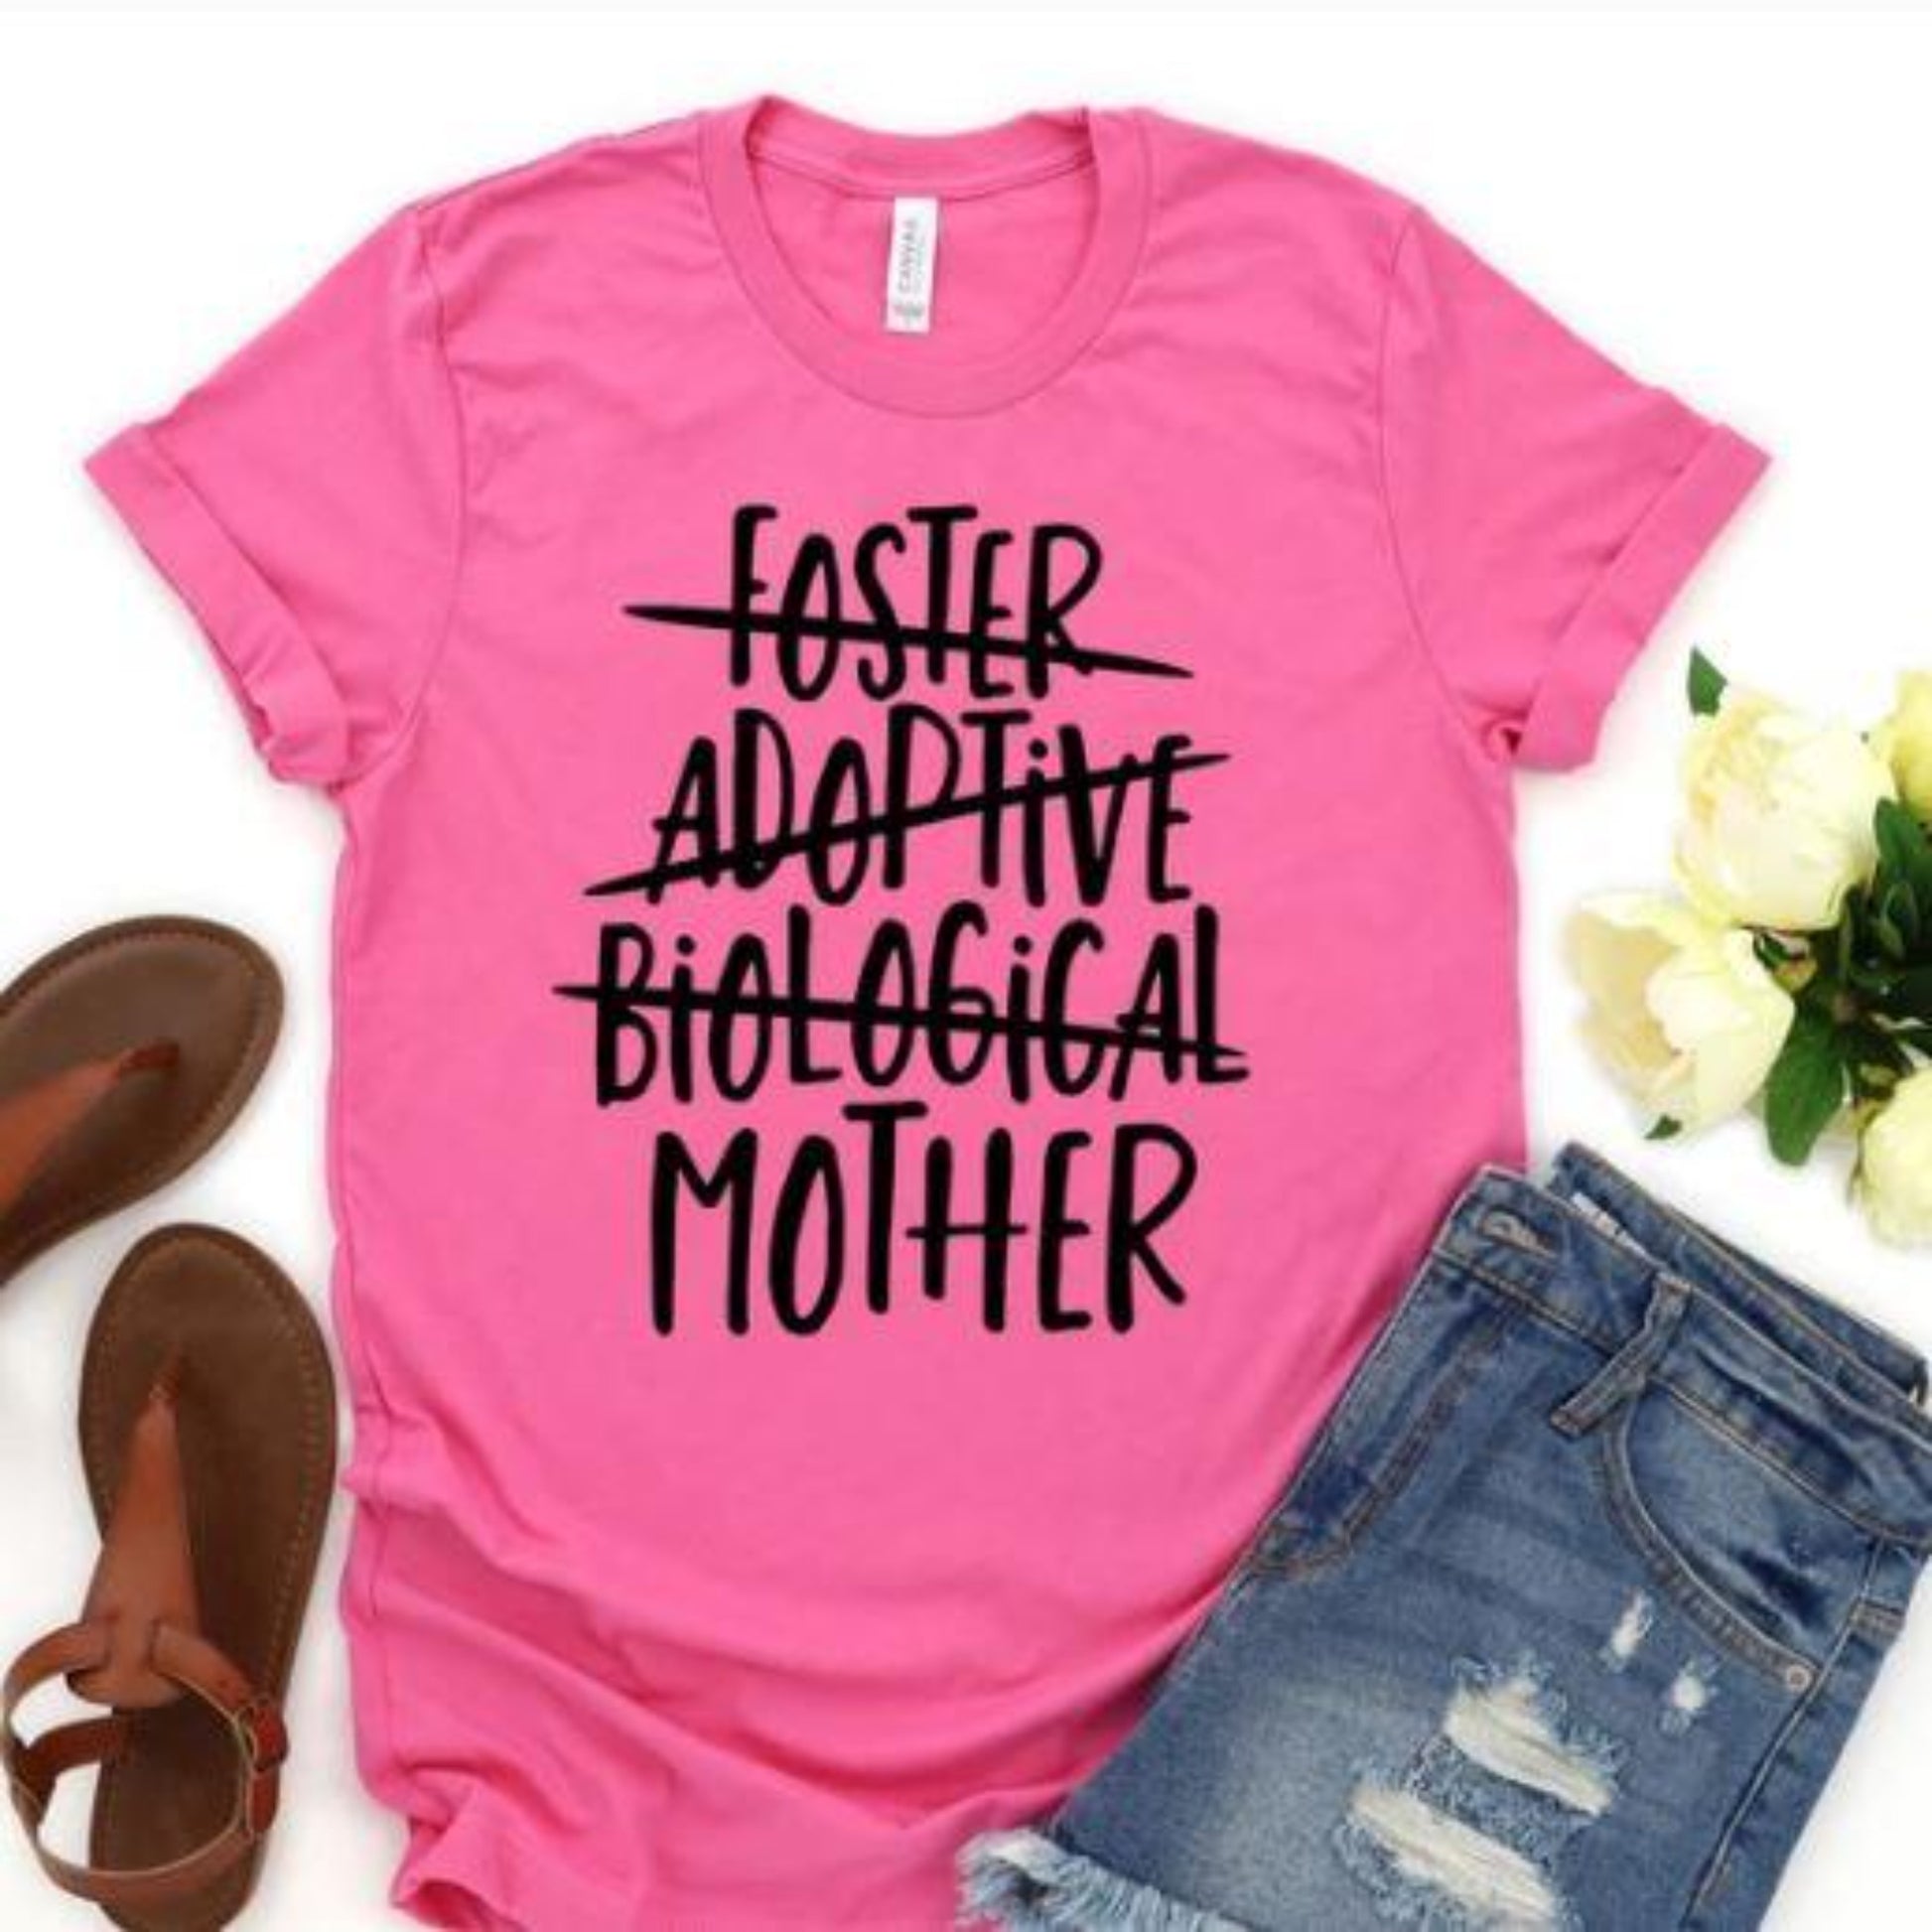 mother_specialty tee everyday wear casual shirt comfortable tshirt